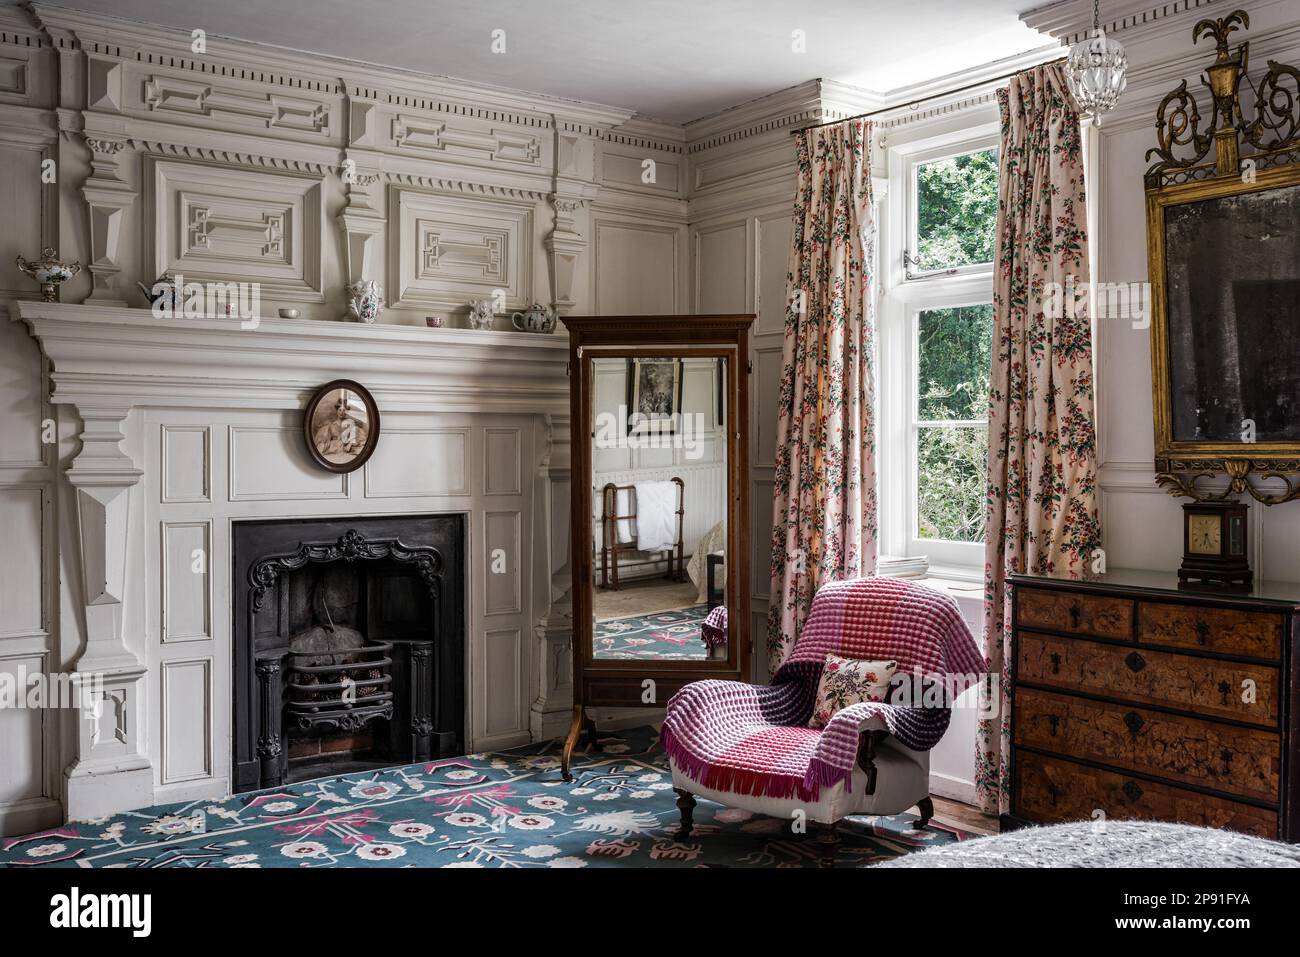 Full length mirror and armchair in window of Wiveton Hall 17th century Jacobean manor house, Norfolk, UK Stock Photo